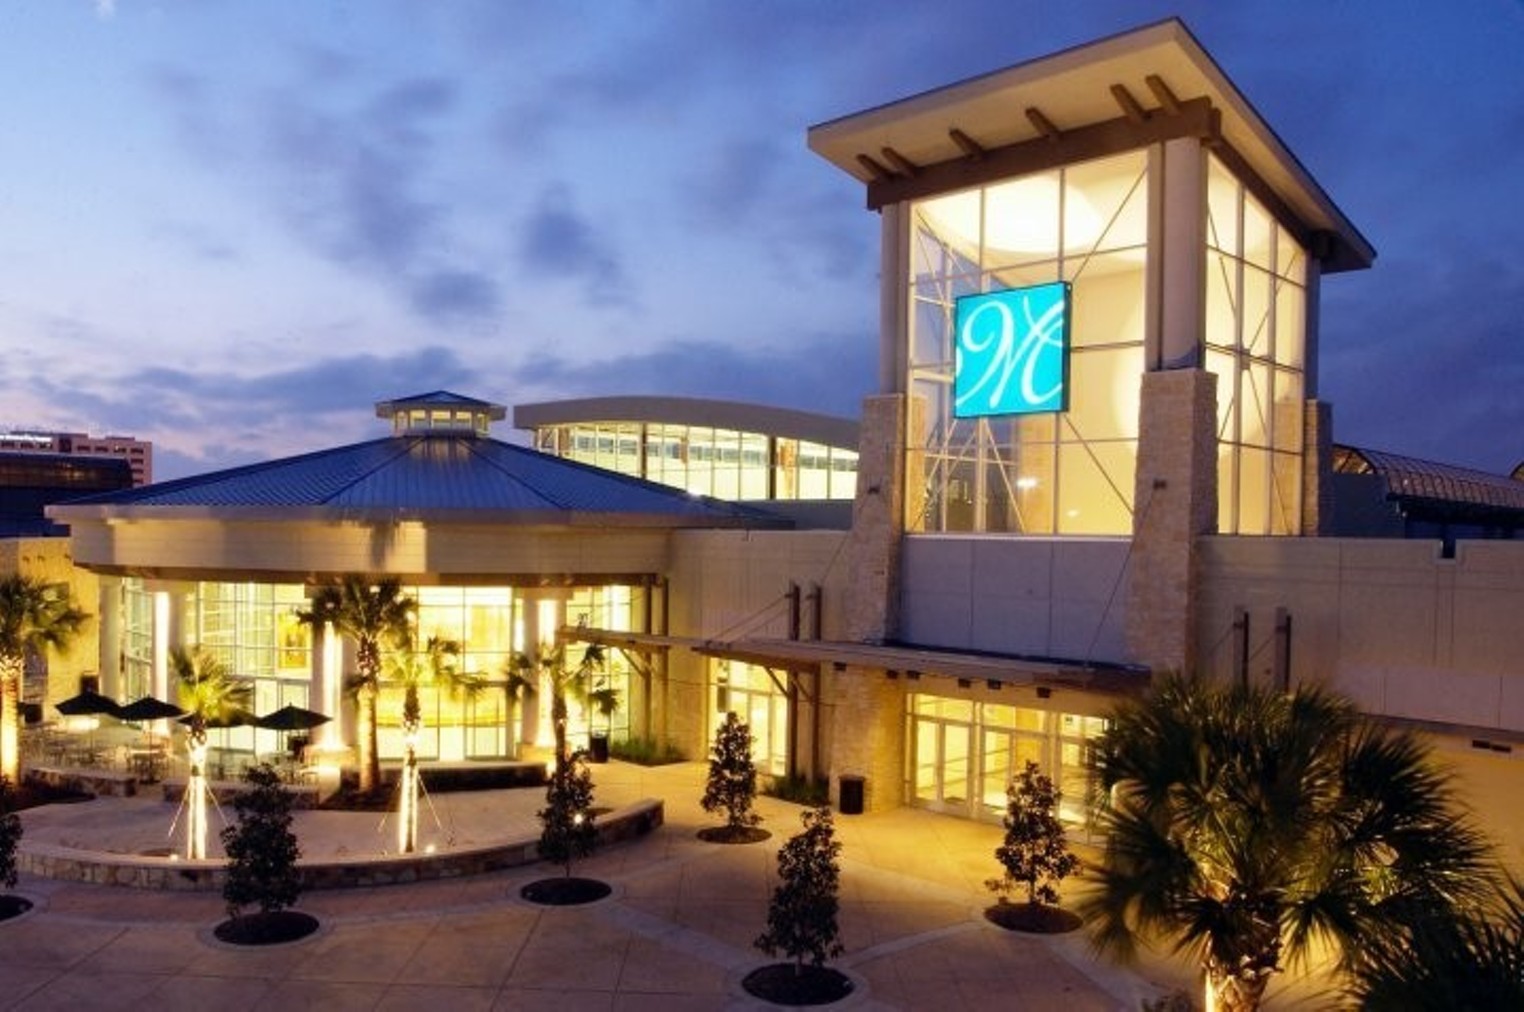 Best Mall-Walking 2000 Memorial City Mall Best of Houston® Best Restaurants, Bars, Clubs, Music and Stores in Houston Houston Press